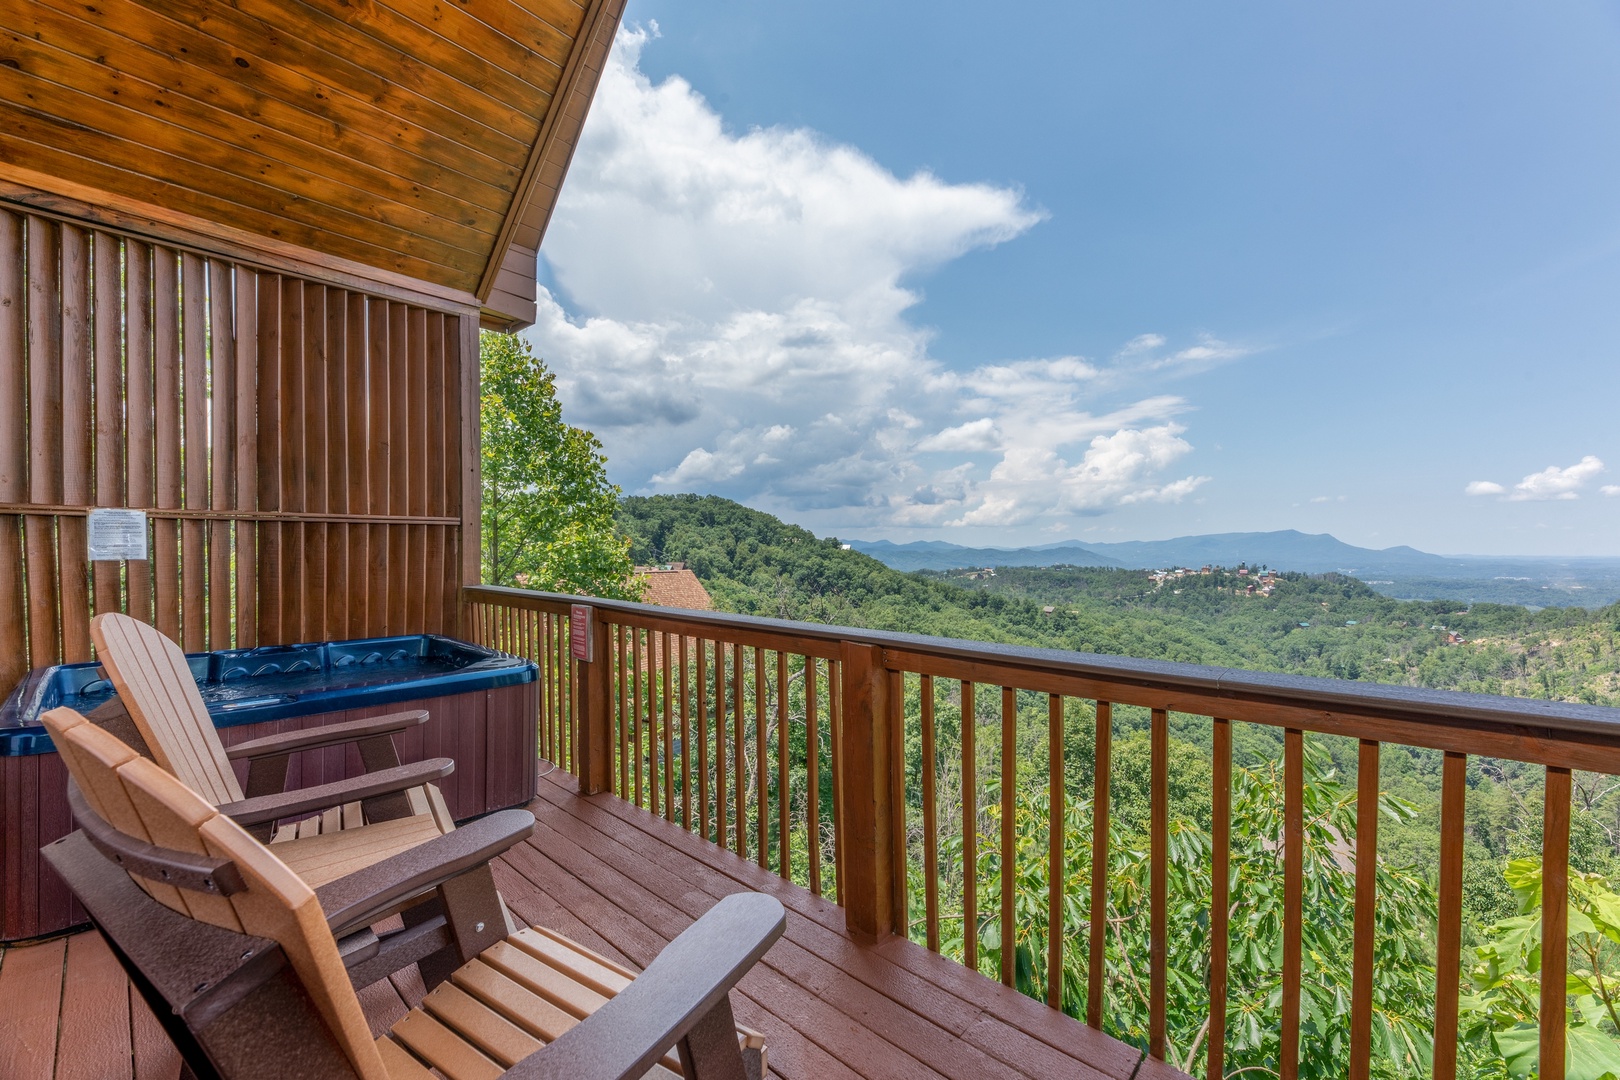 Adirondack chairs, a hot tub, and mountain view at Away From it All, a 1 bedroom cabin rental located in Pigeon Forge